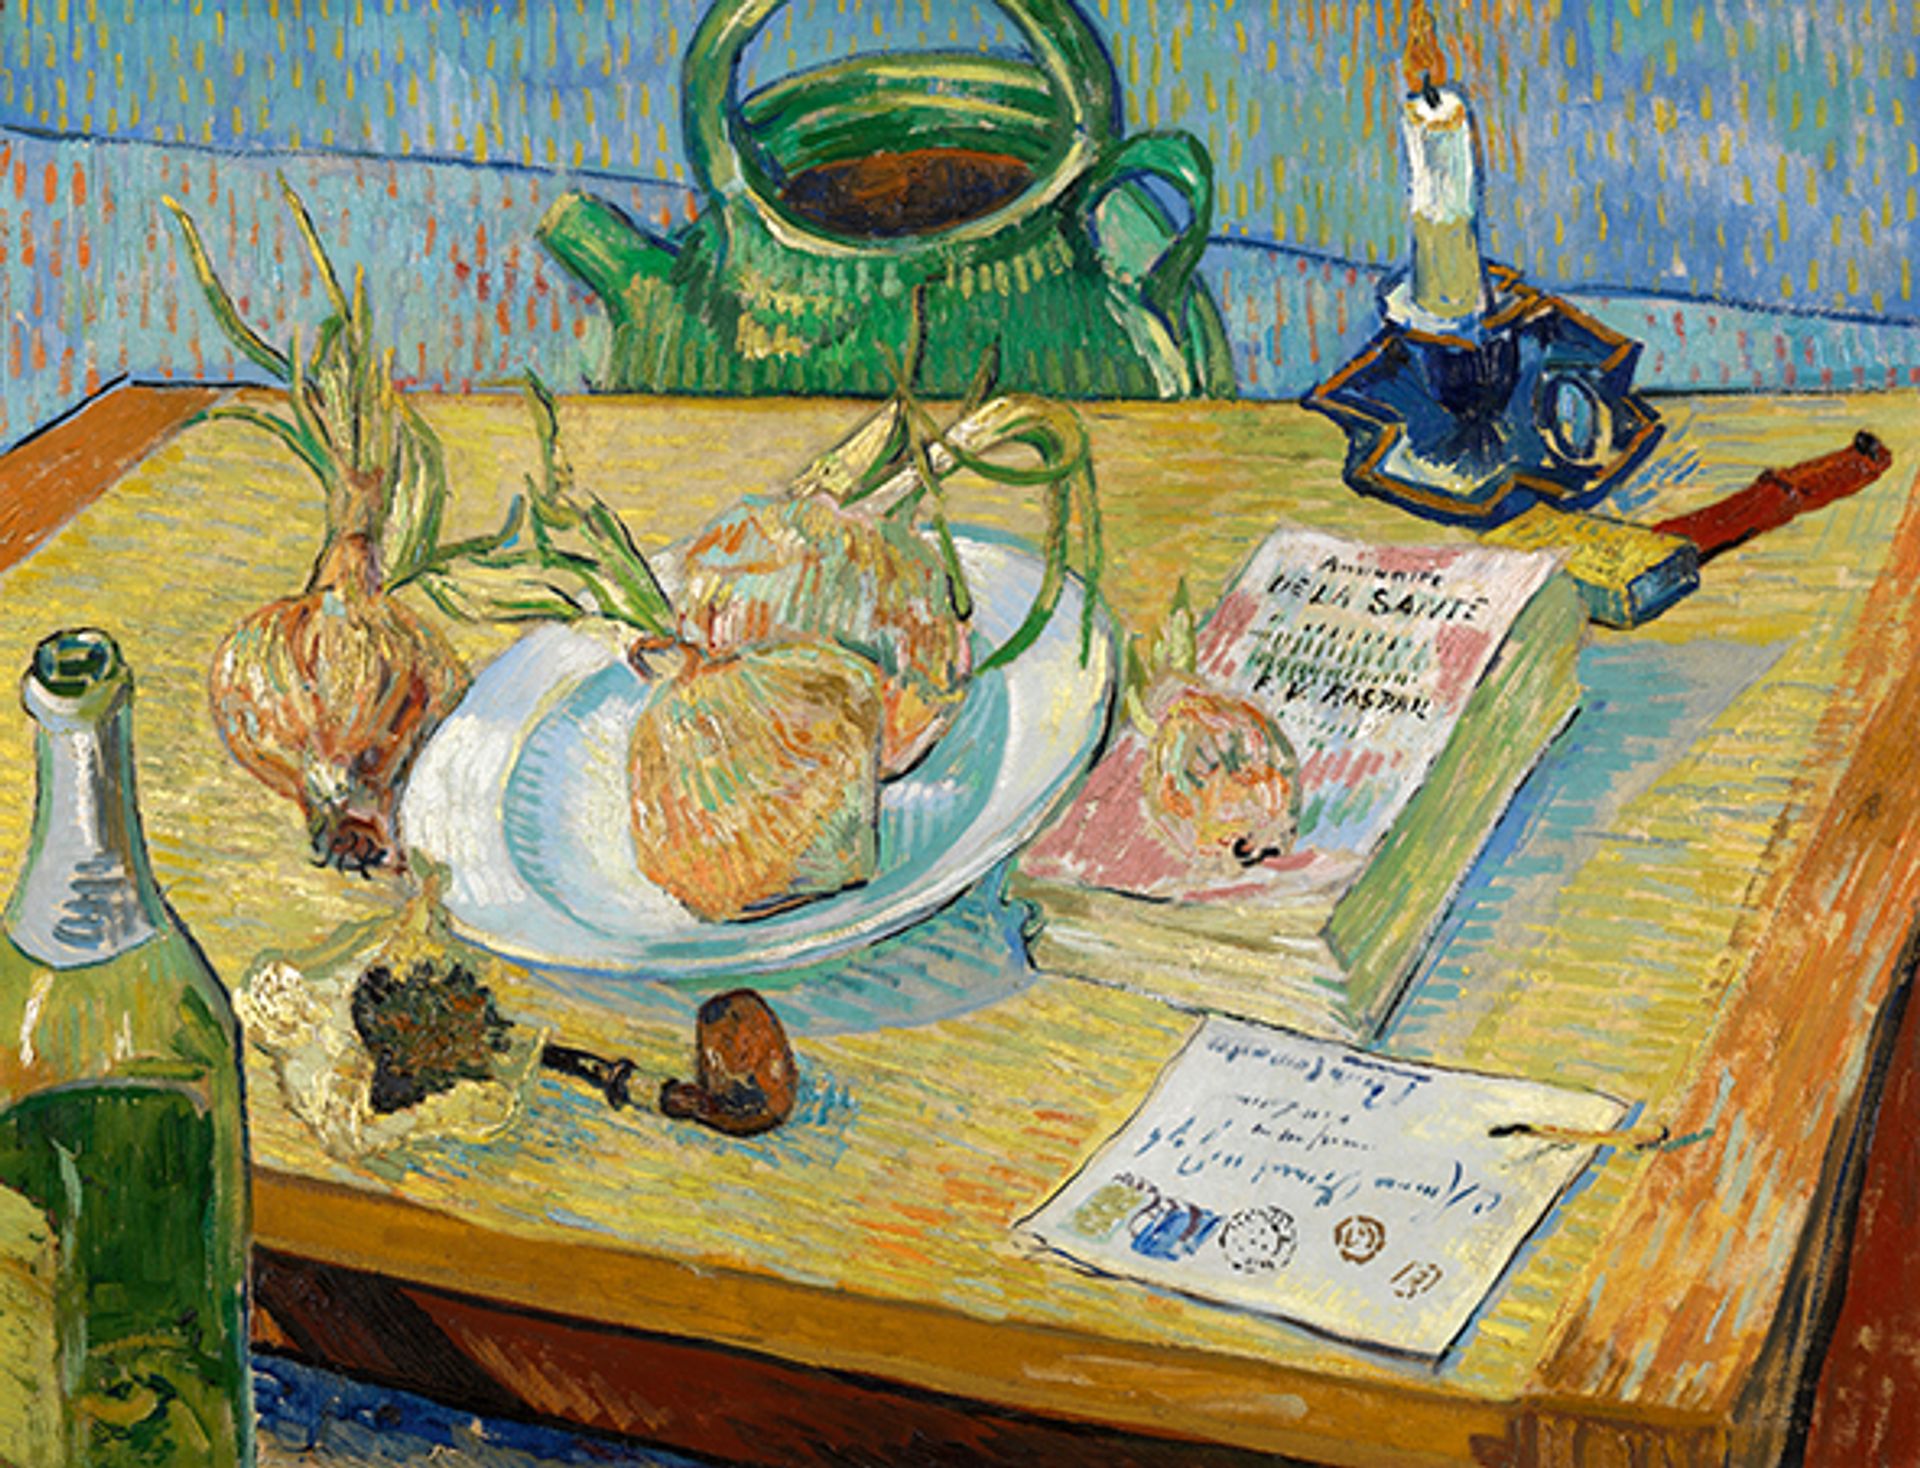 Van Gogh’s Still life with a Plate of Onions (January 1889) Credit: Kröller-Müller Museum, Otterlo